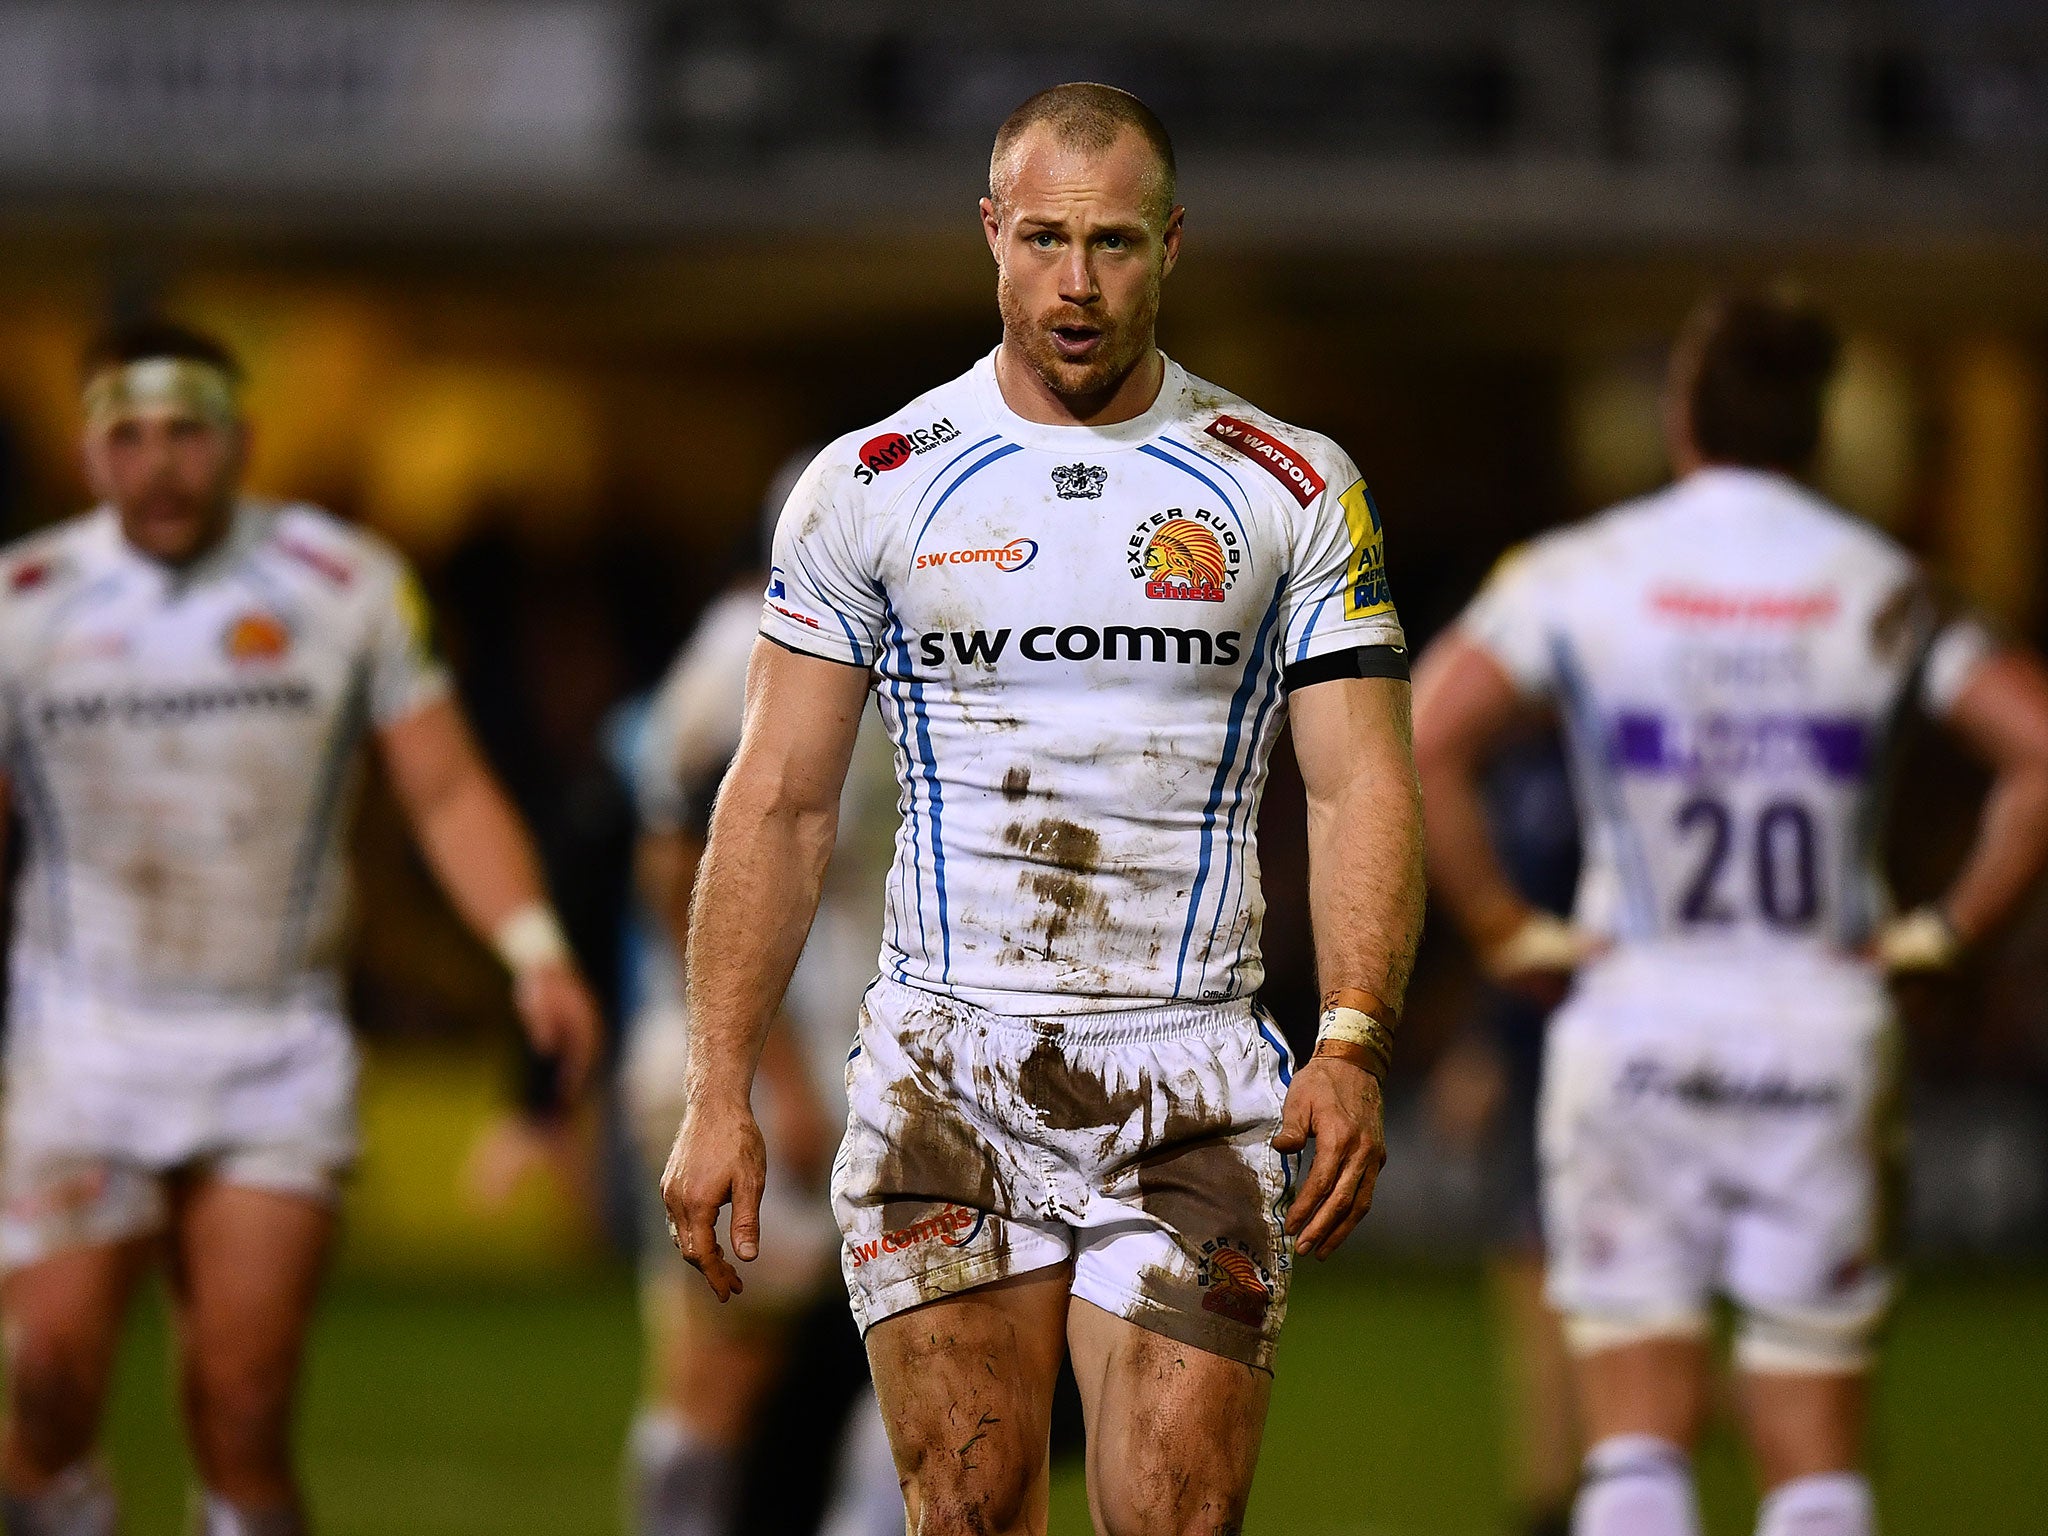 James Short scored two tries as Exeter Chiefs beat Bath 17-11